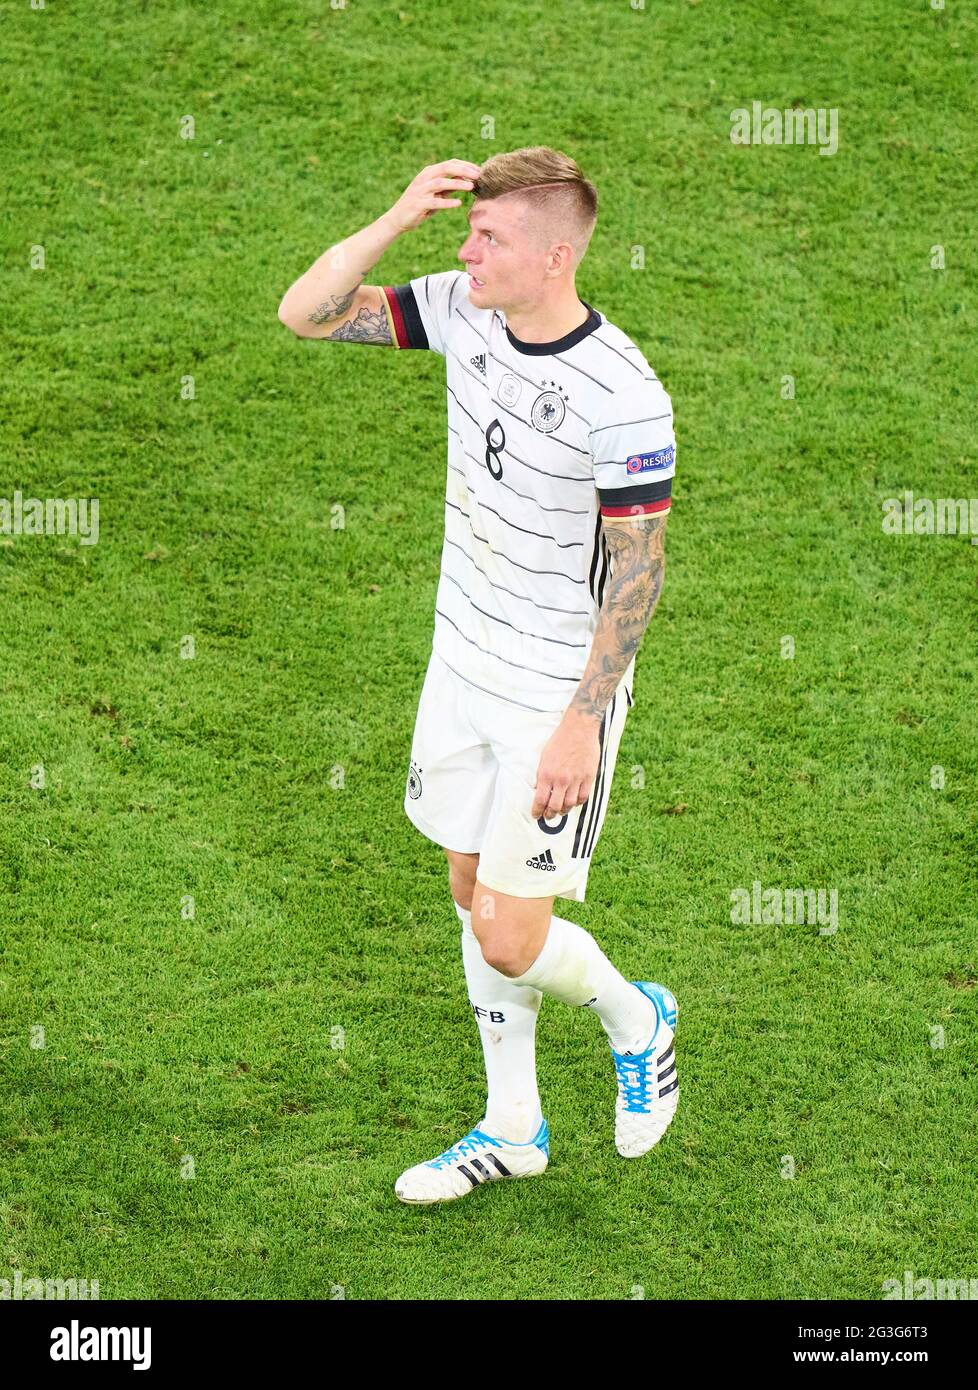 Toni Kroos, DFB 8  after the Group F match FRANCE - GERMANY  1-0 at the football UEFA European Championships 2020 in Season 2020/2021 on June 15, 2021  in Munich, Germany. © Peter Schatz / Alamy Live News Stock Photo